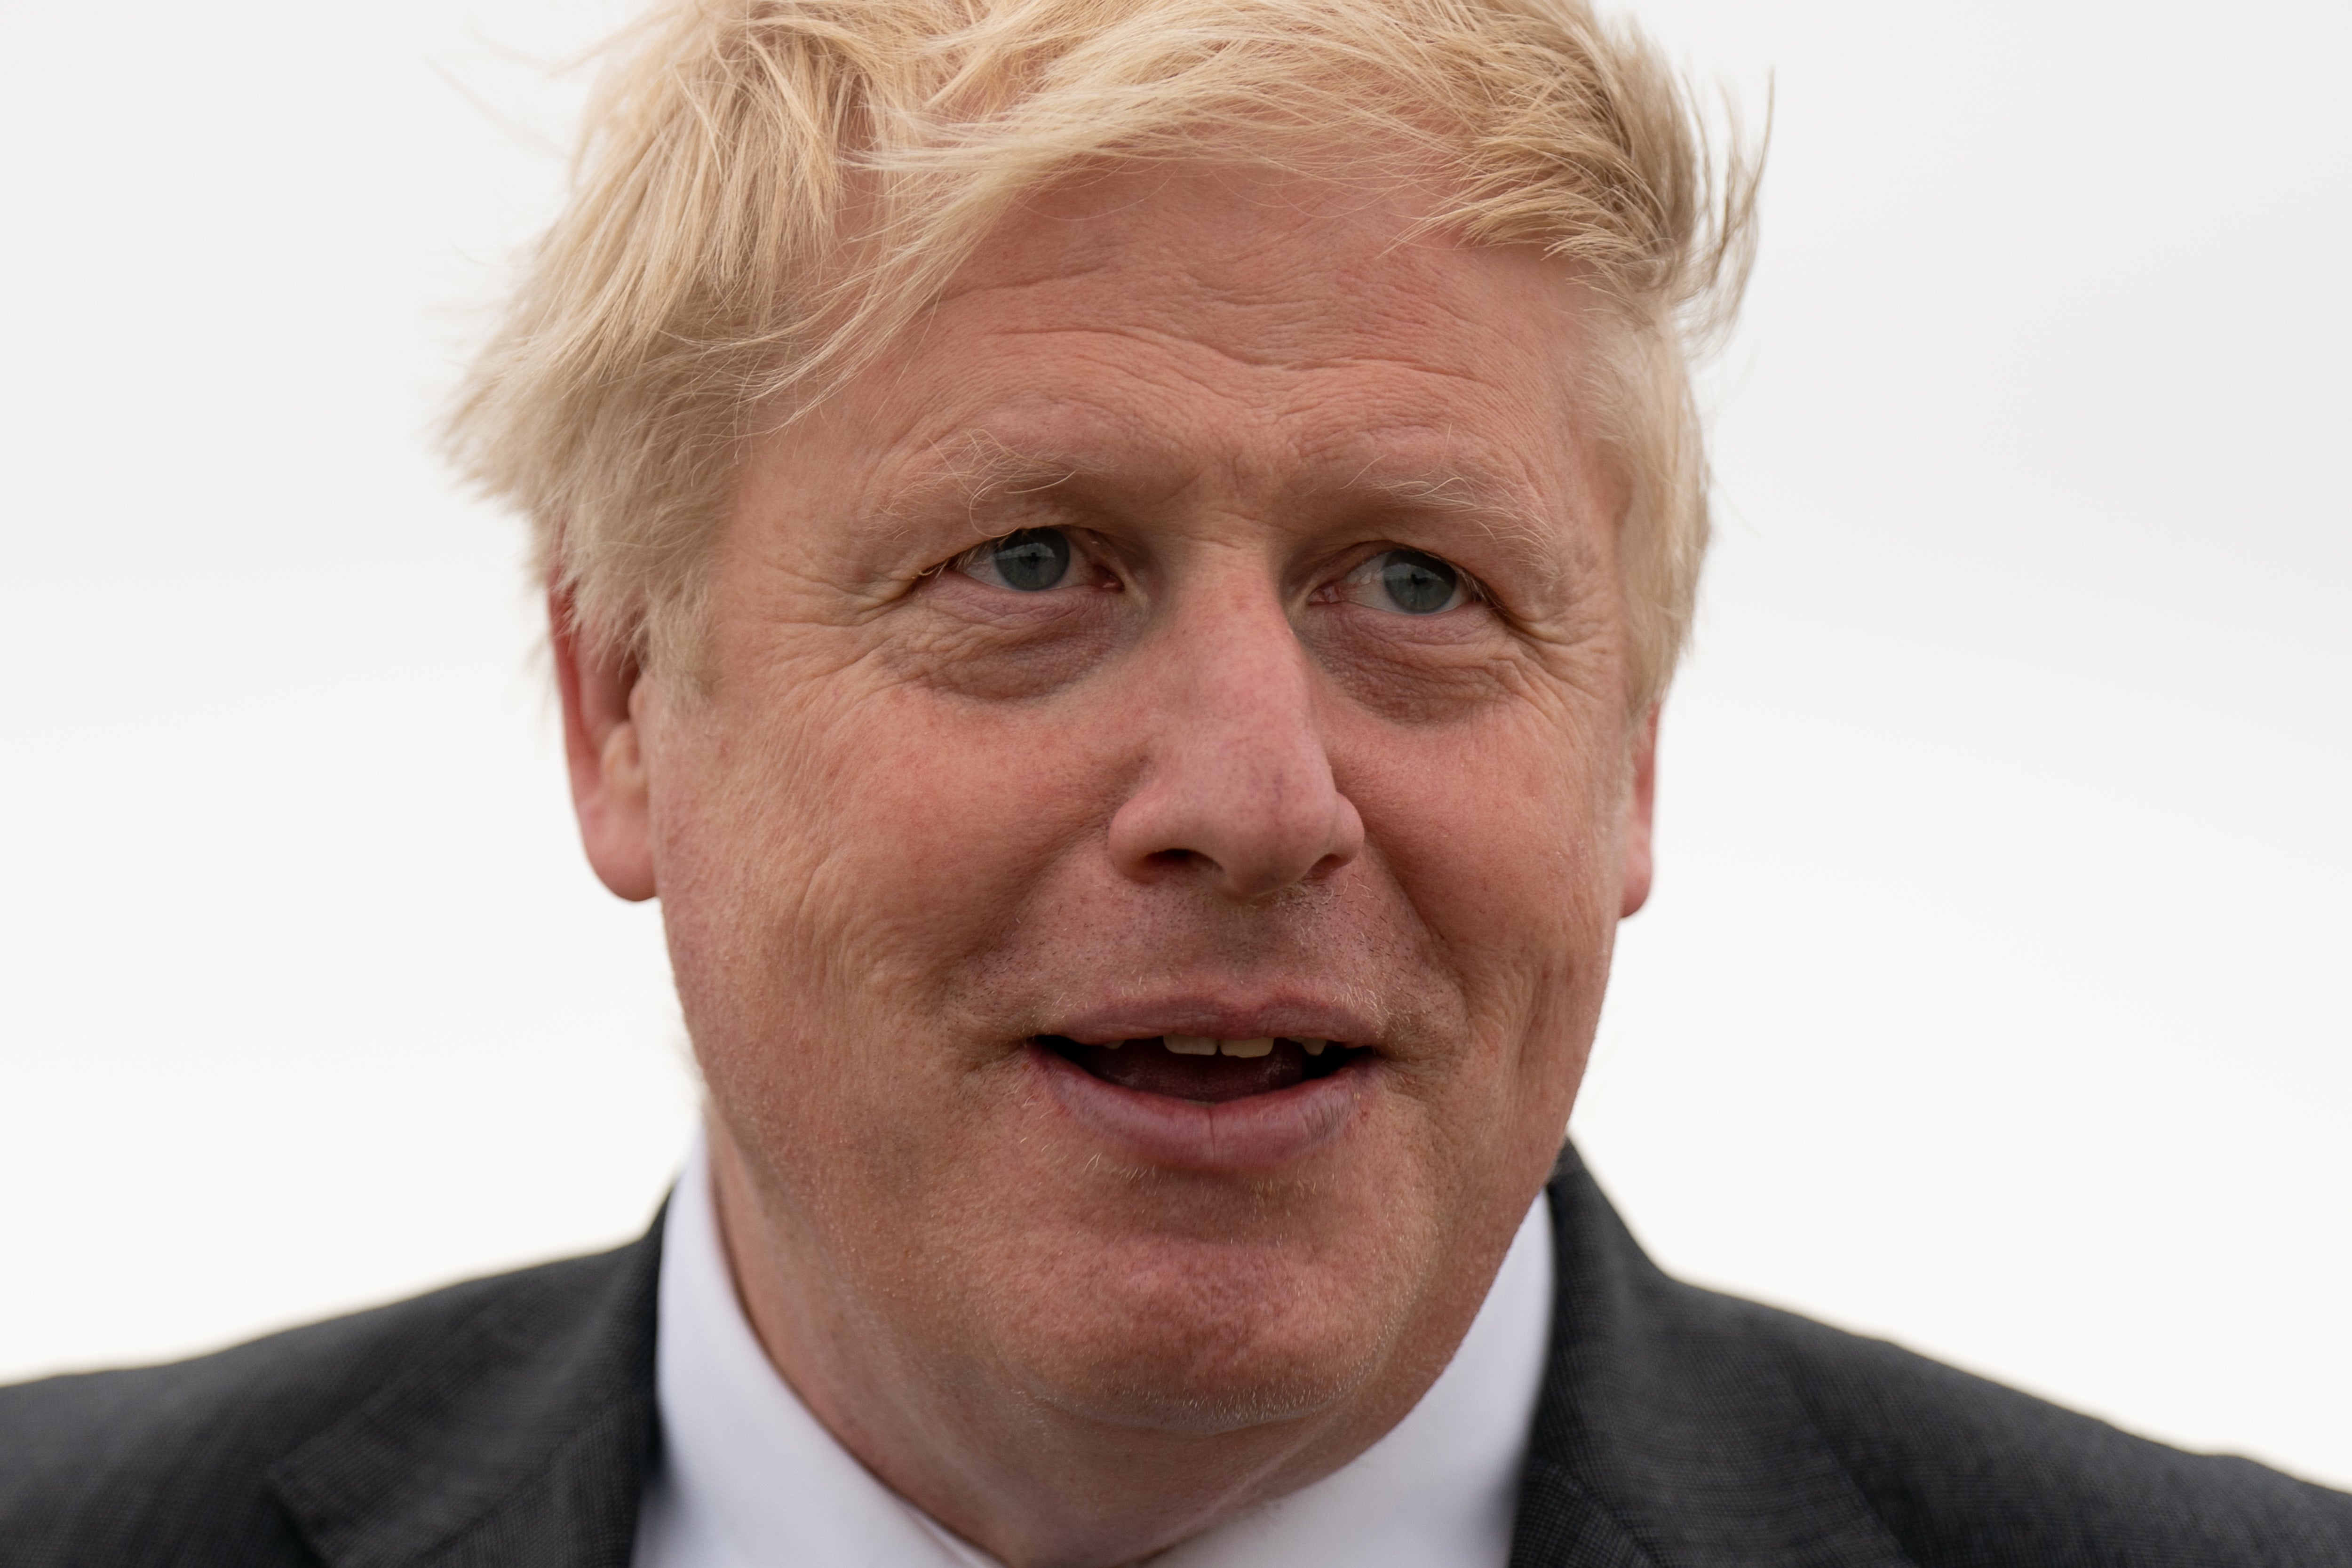 Boris Johnson blusters and bumbles about like he’s doing a bad impression of himself